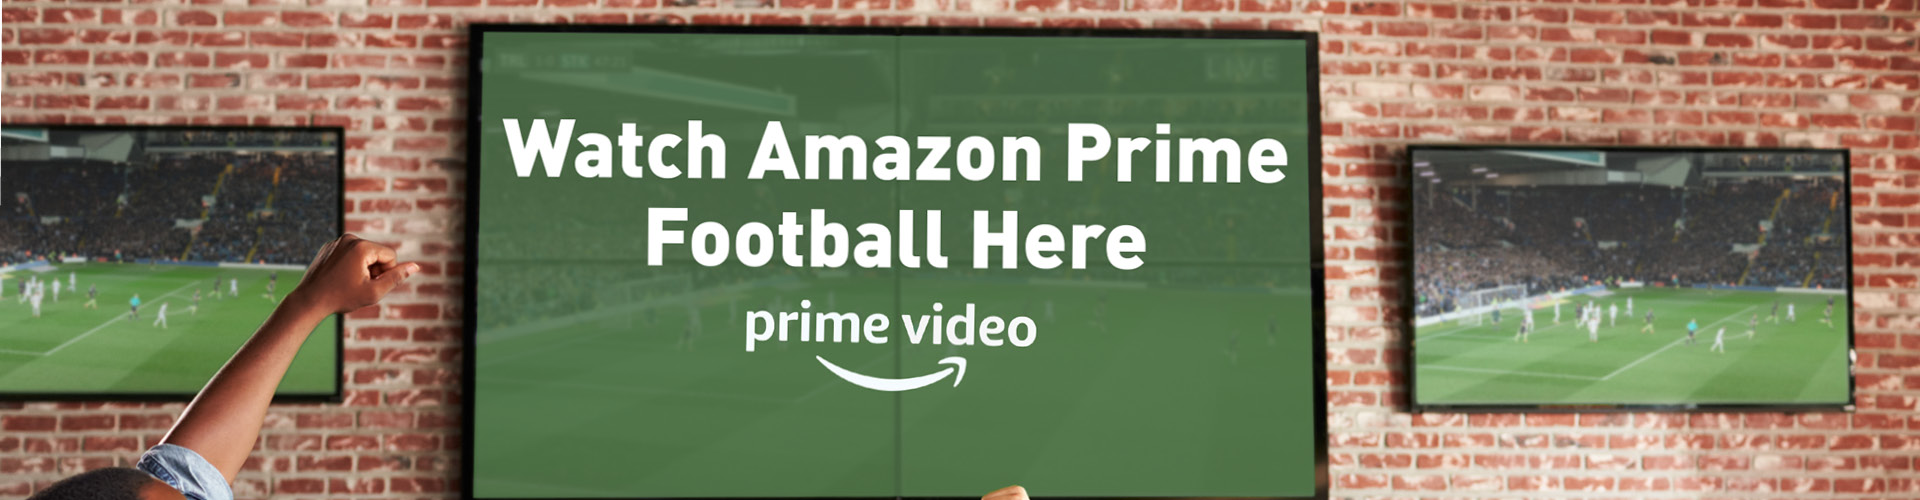 Watch Amazon Prime football at The Cheshire Cheese in London